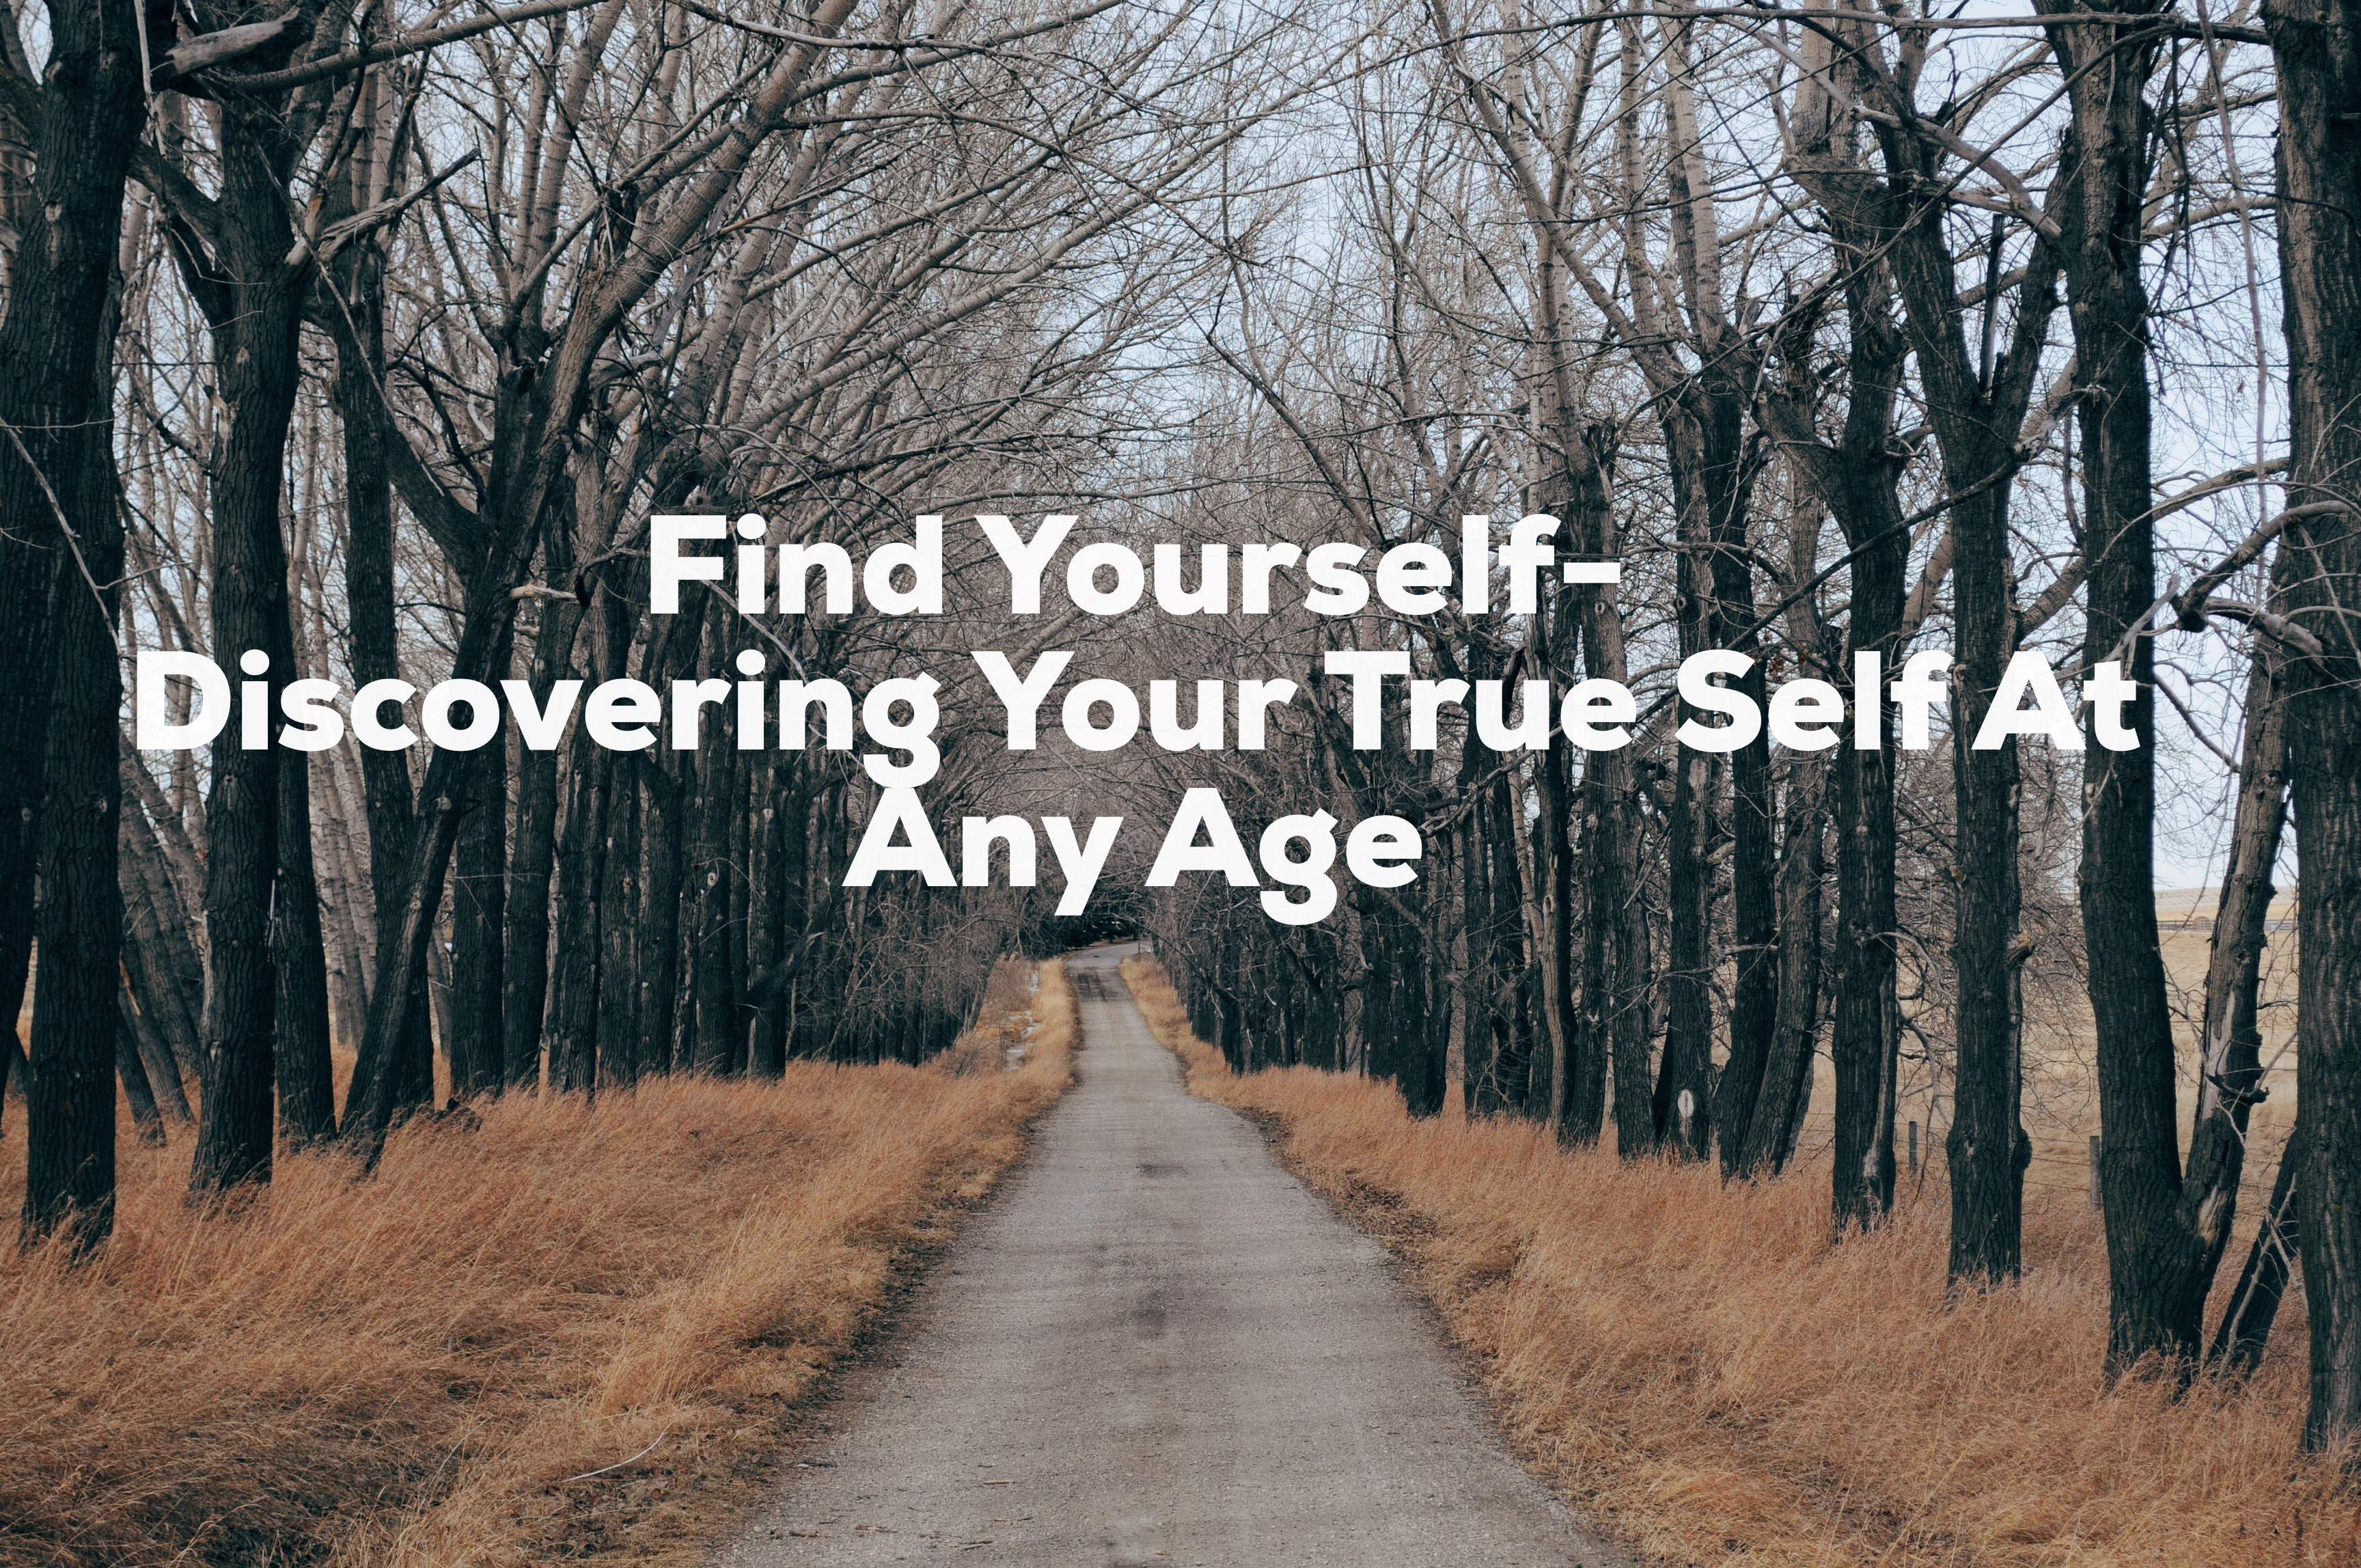 Find Yourself-Discovering Your True Self At Any Age